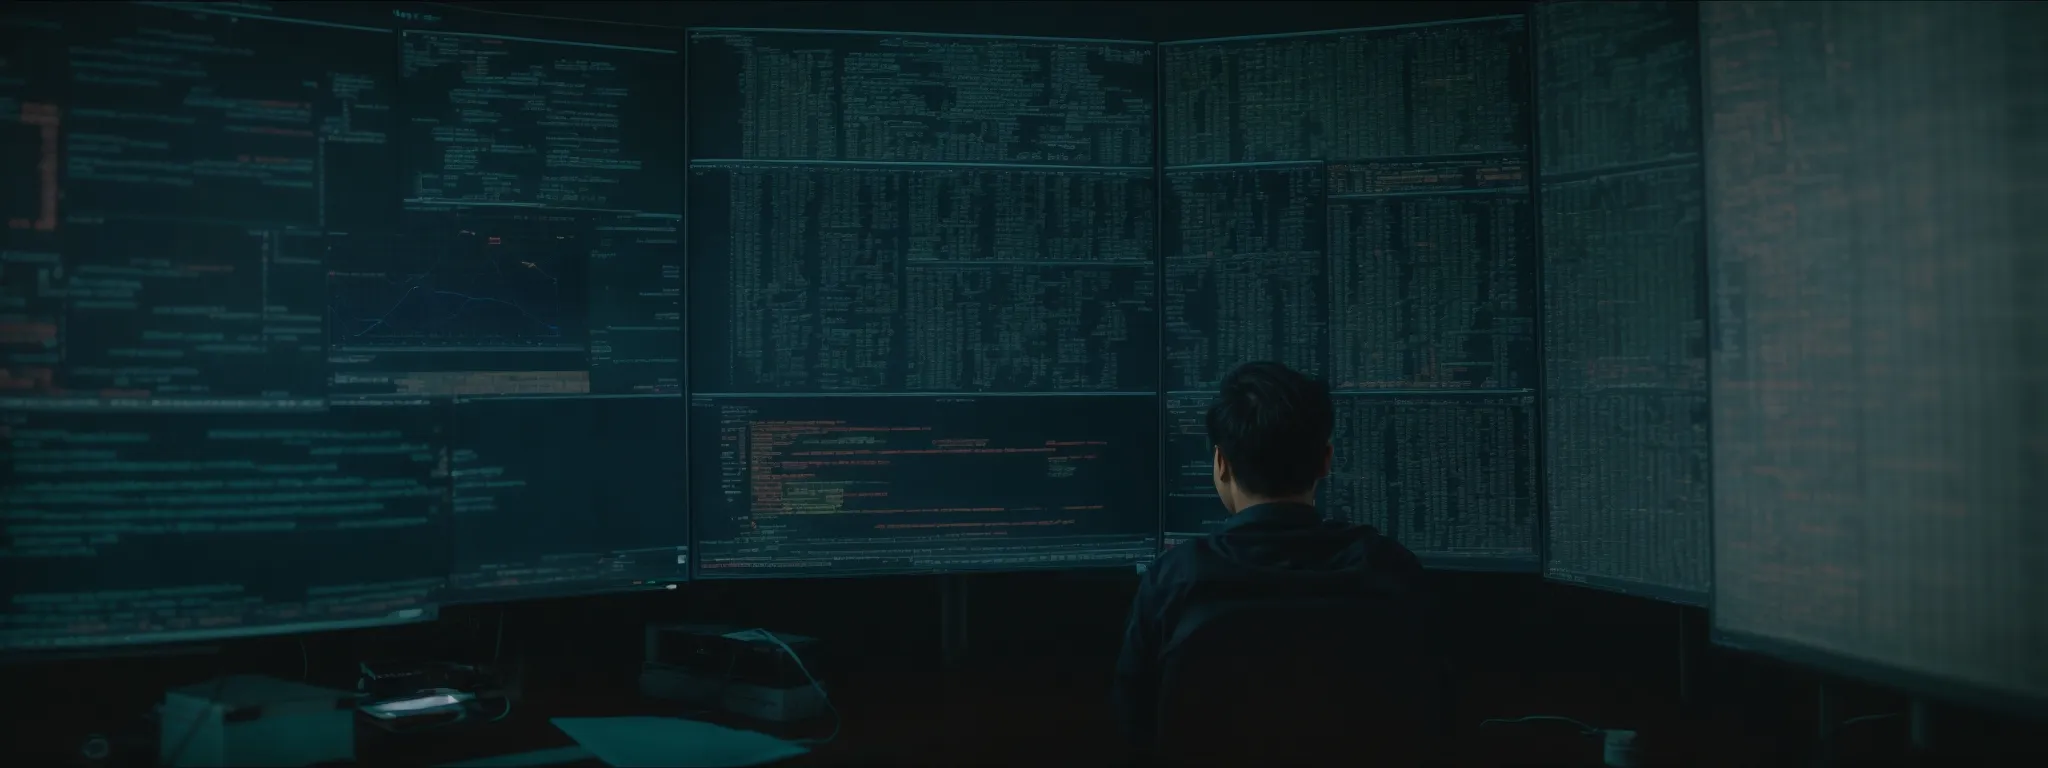 a person studying analytics on a computer screen, surrounded by web development code and strategy charts.